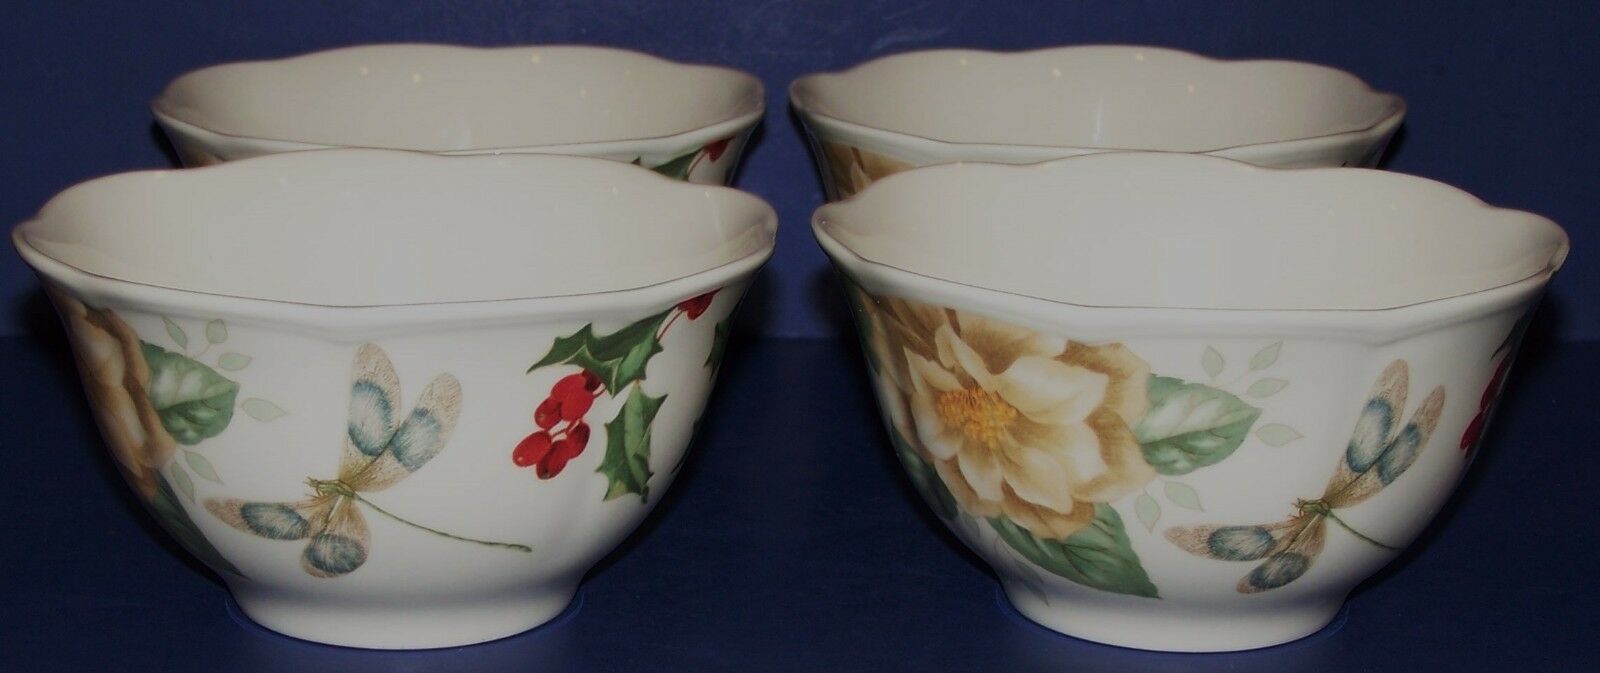 BEAUTIFUL SET OF 4 LENOX BUTTERFLY MEADOW HOLIDAY DRAGONFLY JASMINE RICE BOWLS